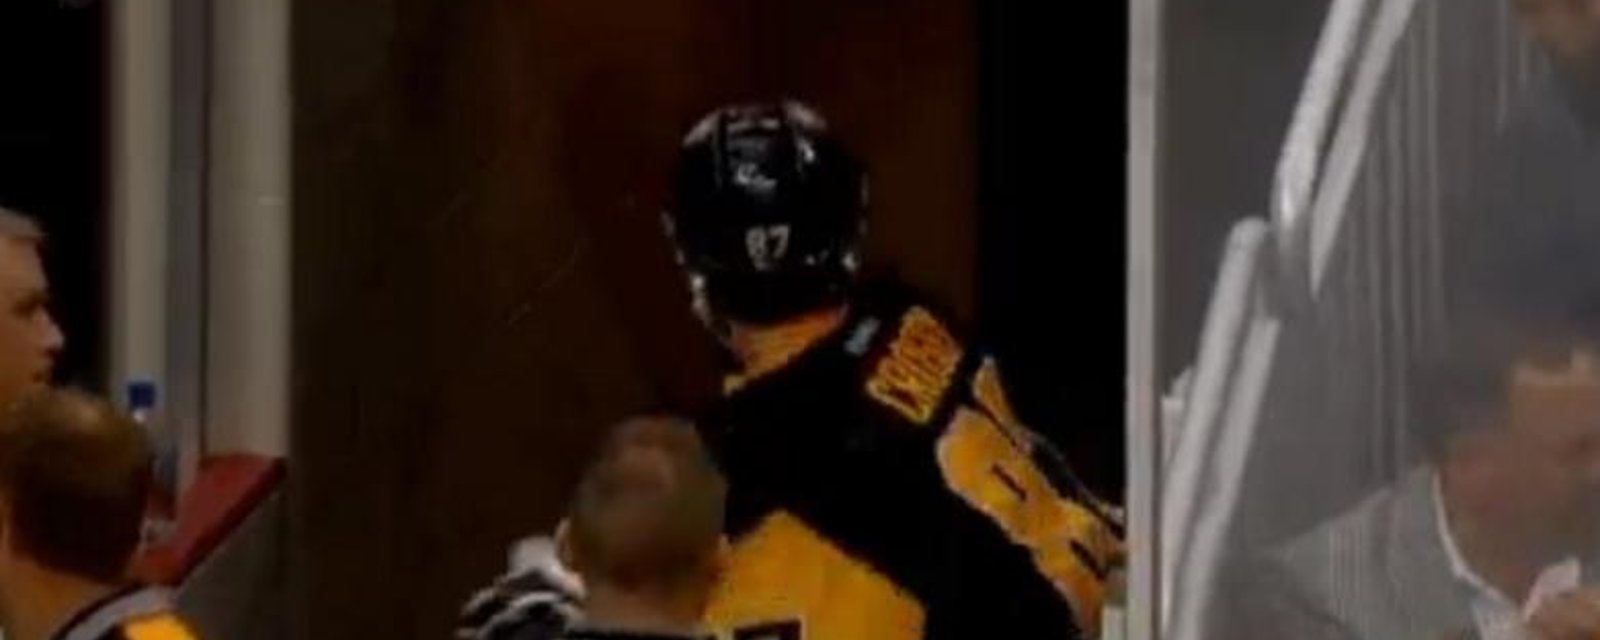 Sidney Crosby leaves the game after a slash from Alex Ovechkin.